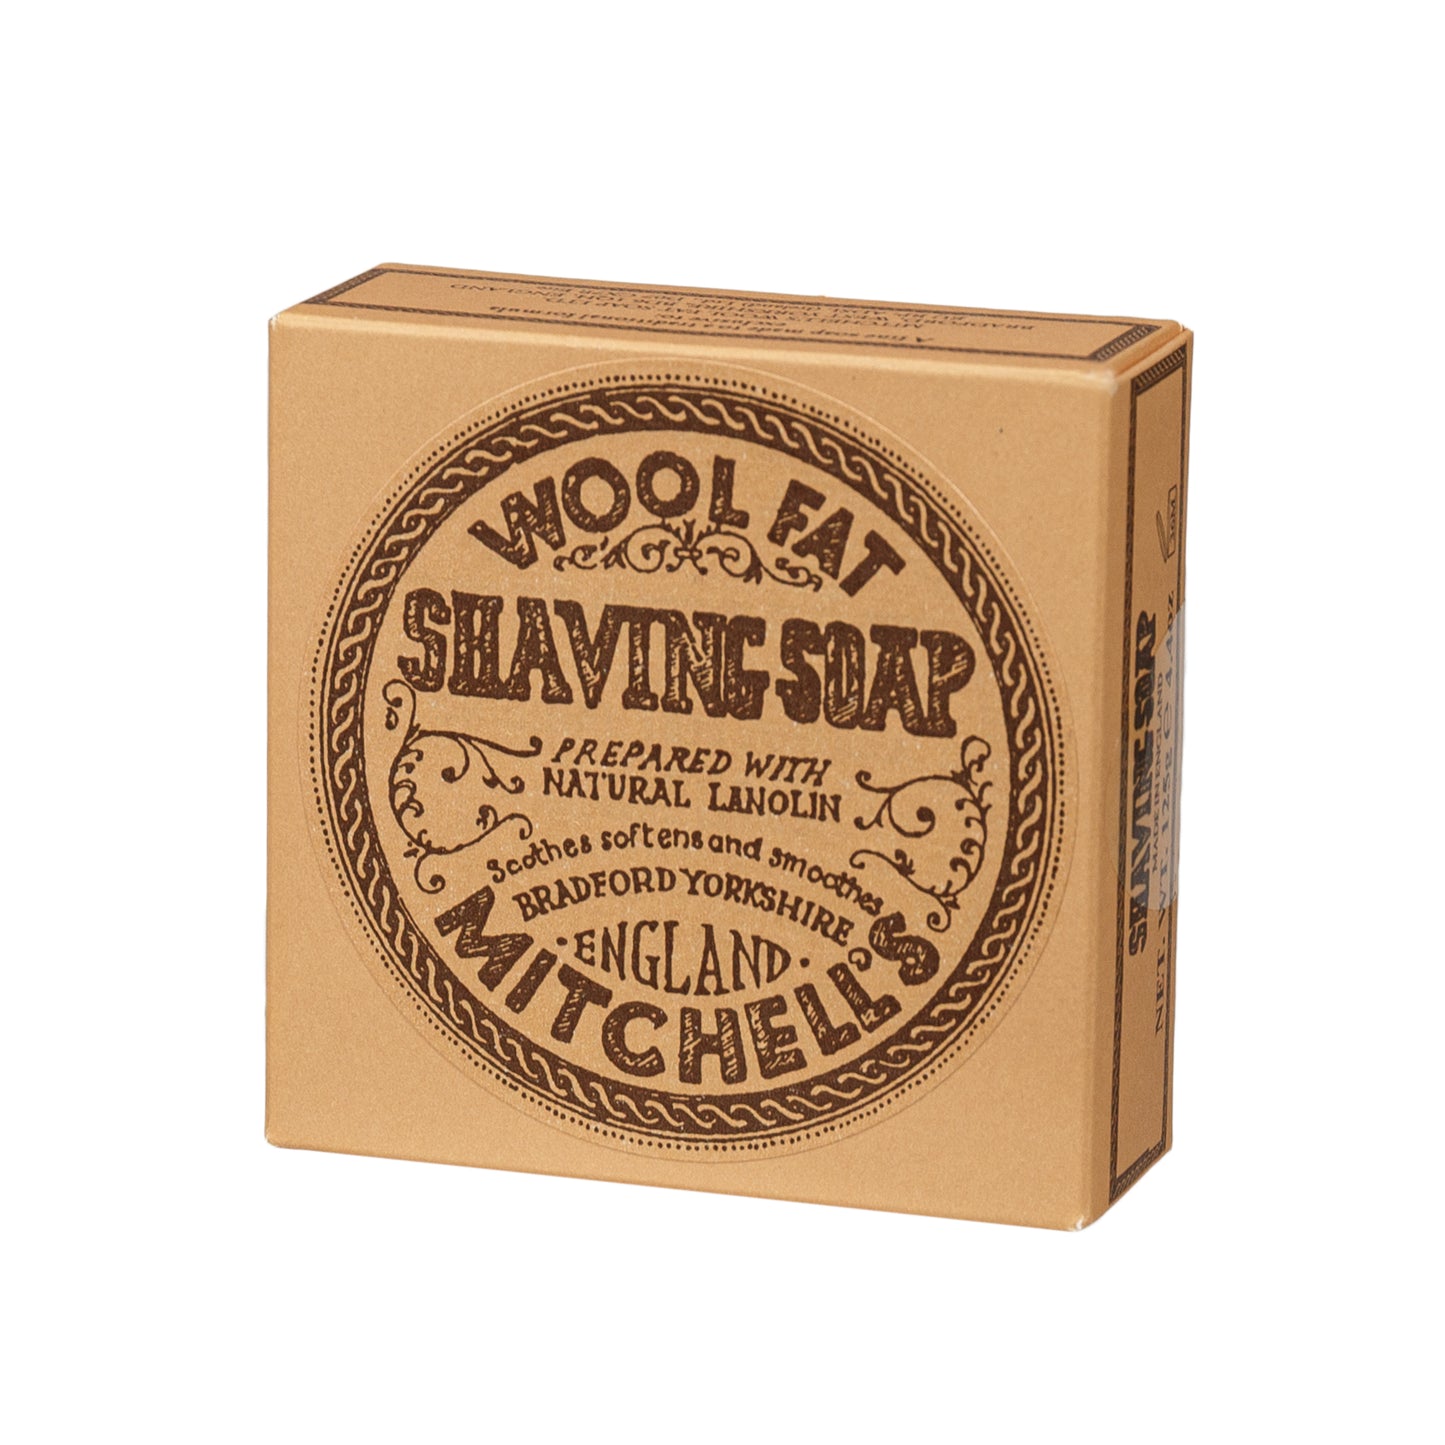 Primary Image of Wool Fat Shave Refill Soap